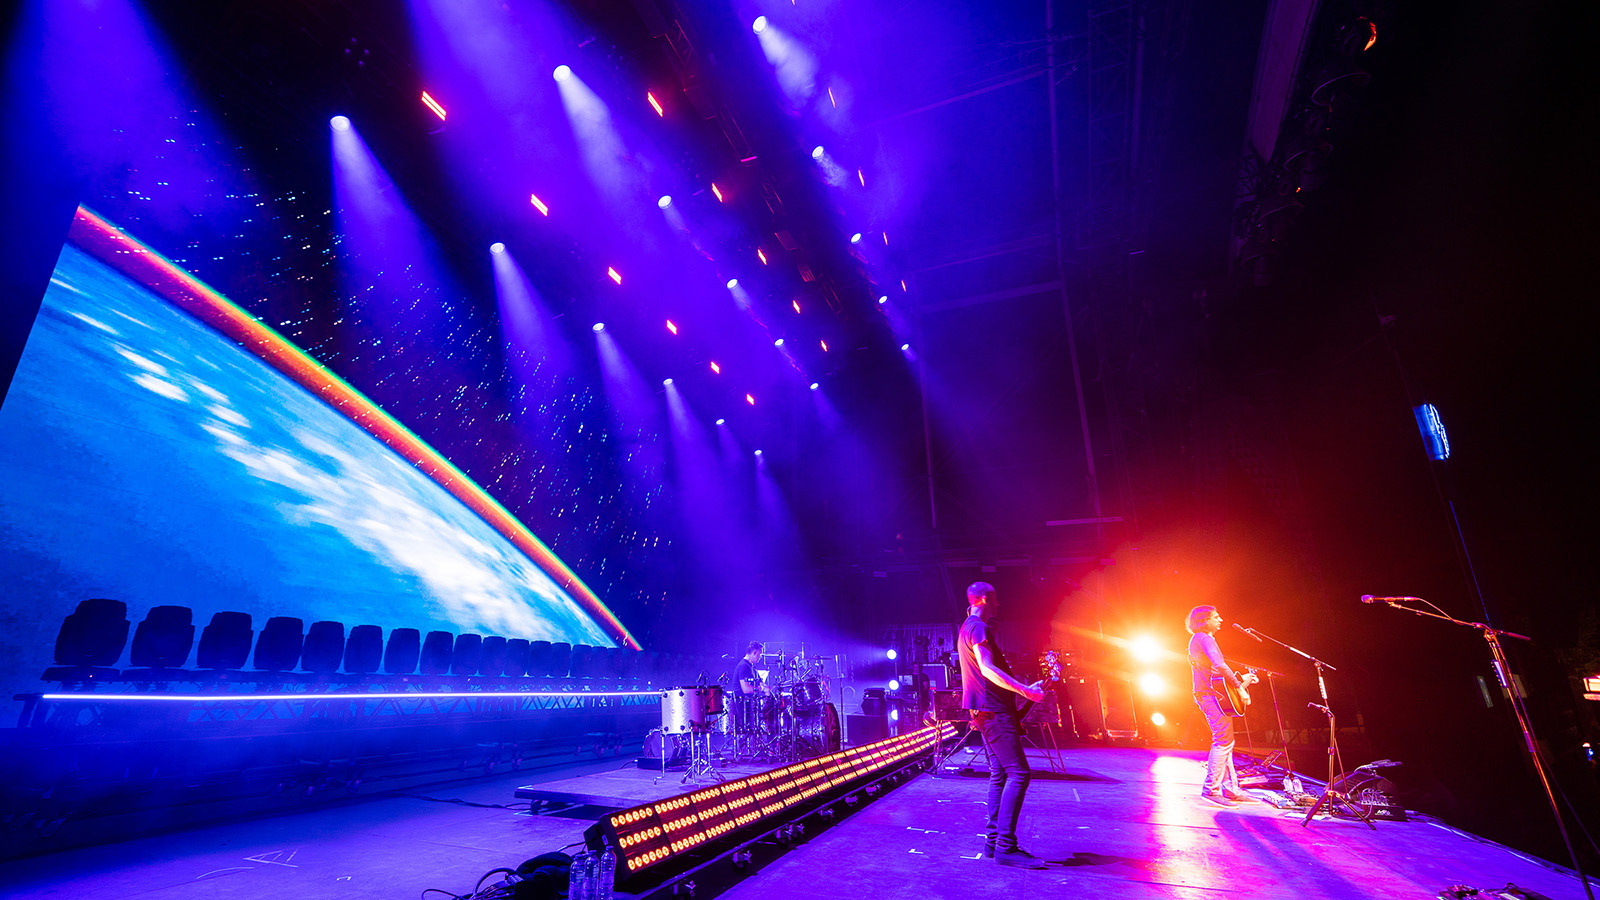 XDC1 IP Hybrid provides Snow Patrol with a dynamic, colour-changing band riser